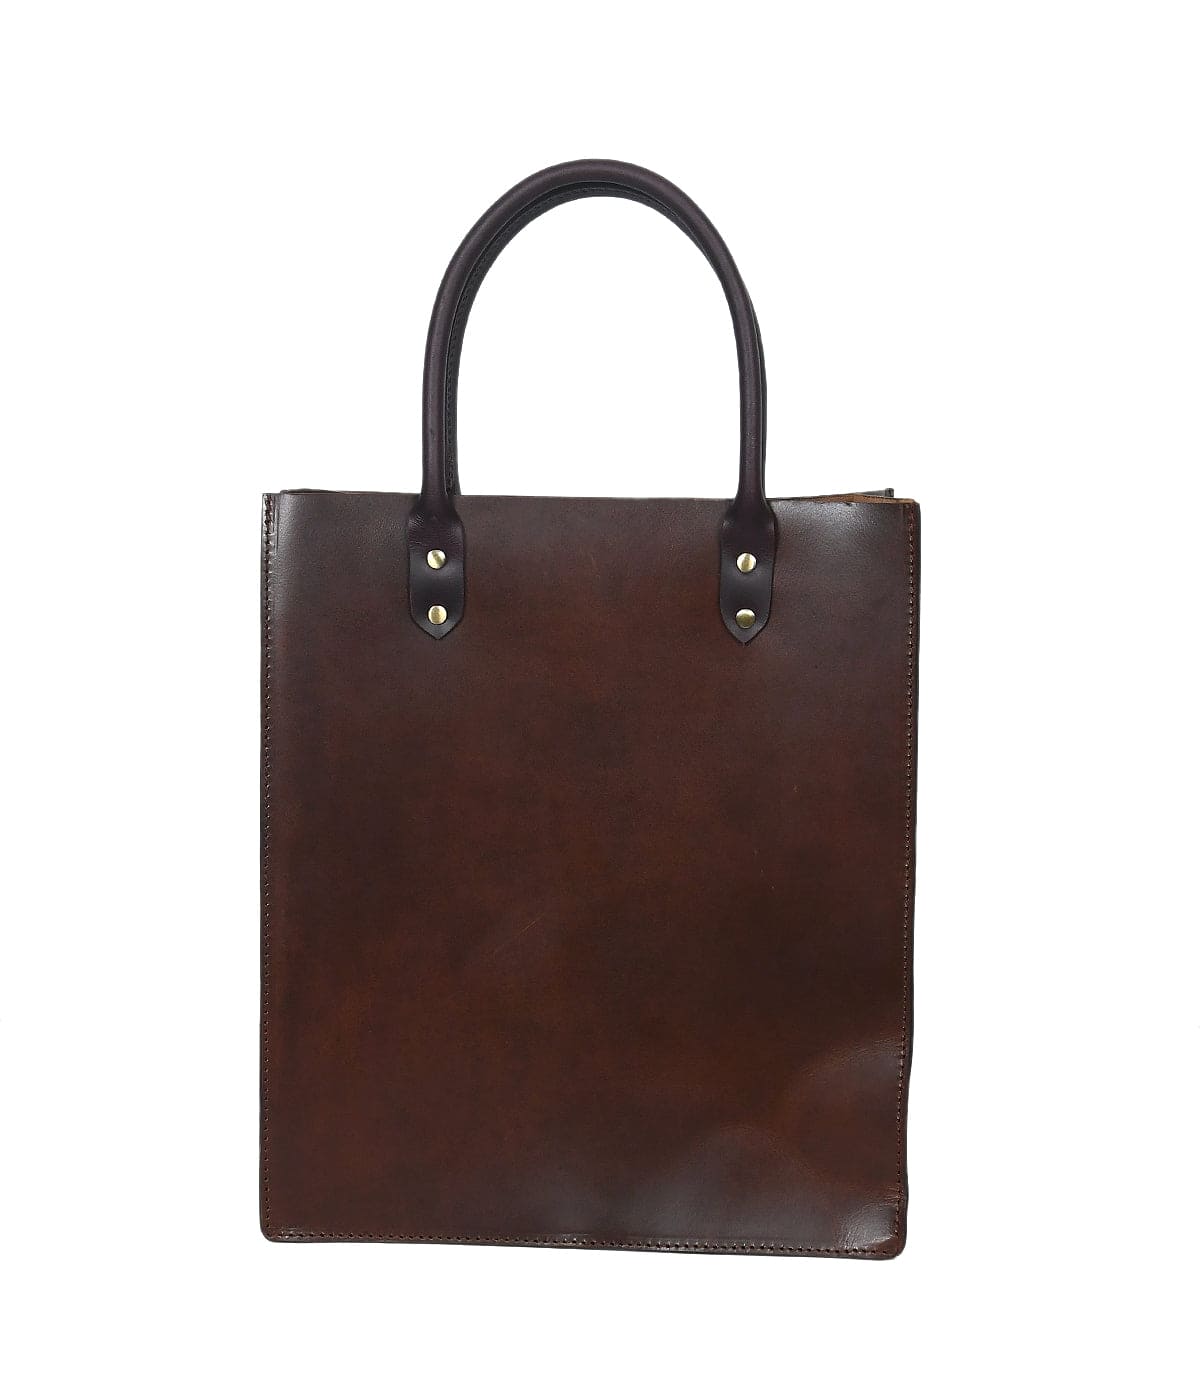 Elegance in Brown: Discover Our Exquisite Brown Leather Shopper Bag. - CELTICINDIA